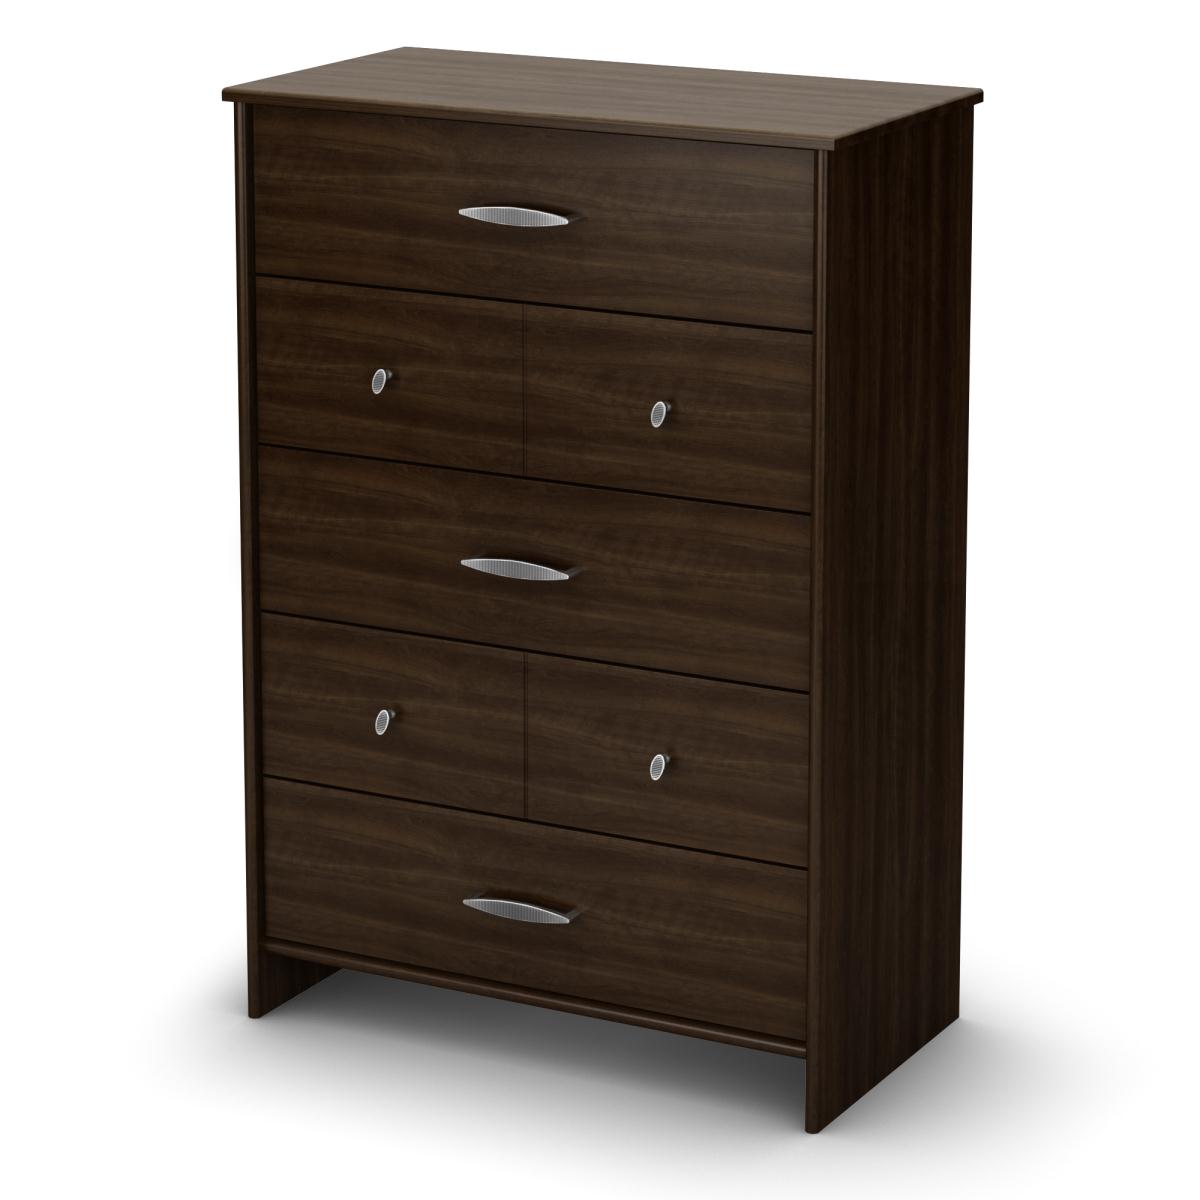 South Shore Highway 7 Drawer Chest - Mocha